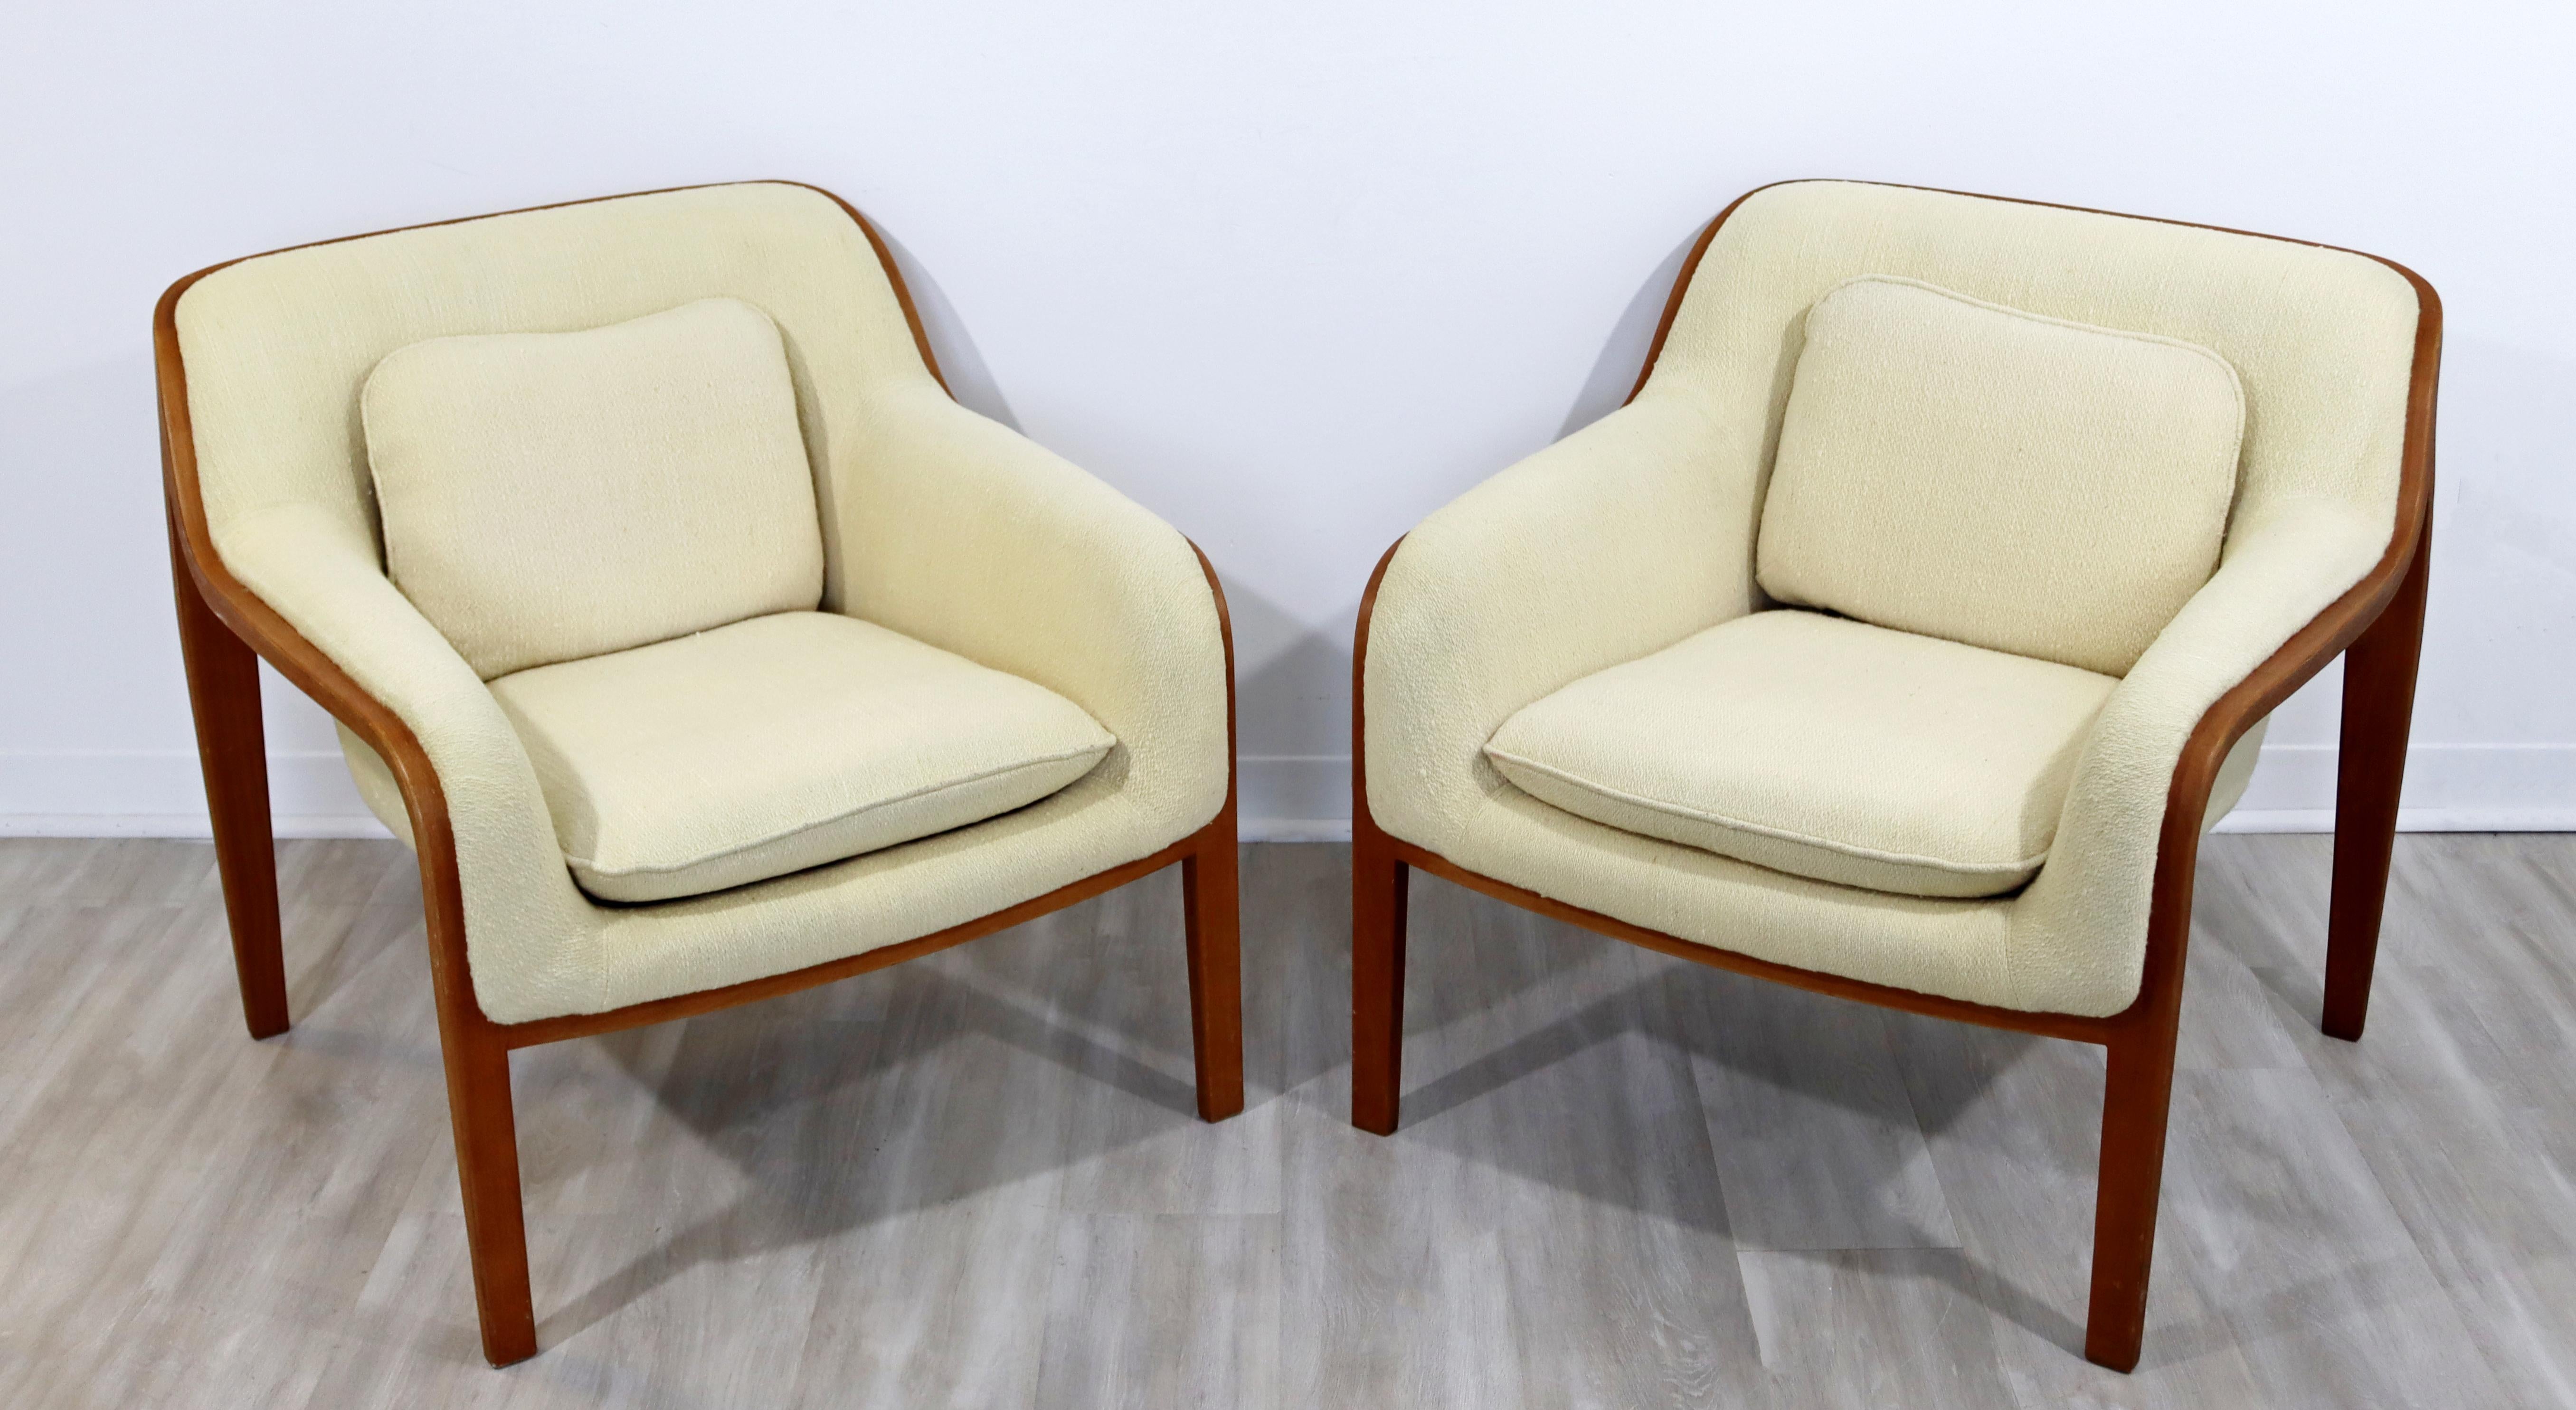 For your consideration is a stupendous pair of club or lounge armchairs, on curved wood, by Bill Stephens for Knoll, circa the 1970s. In excellent vintage condition. The dimensions are 29